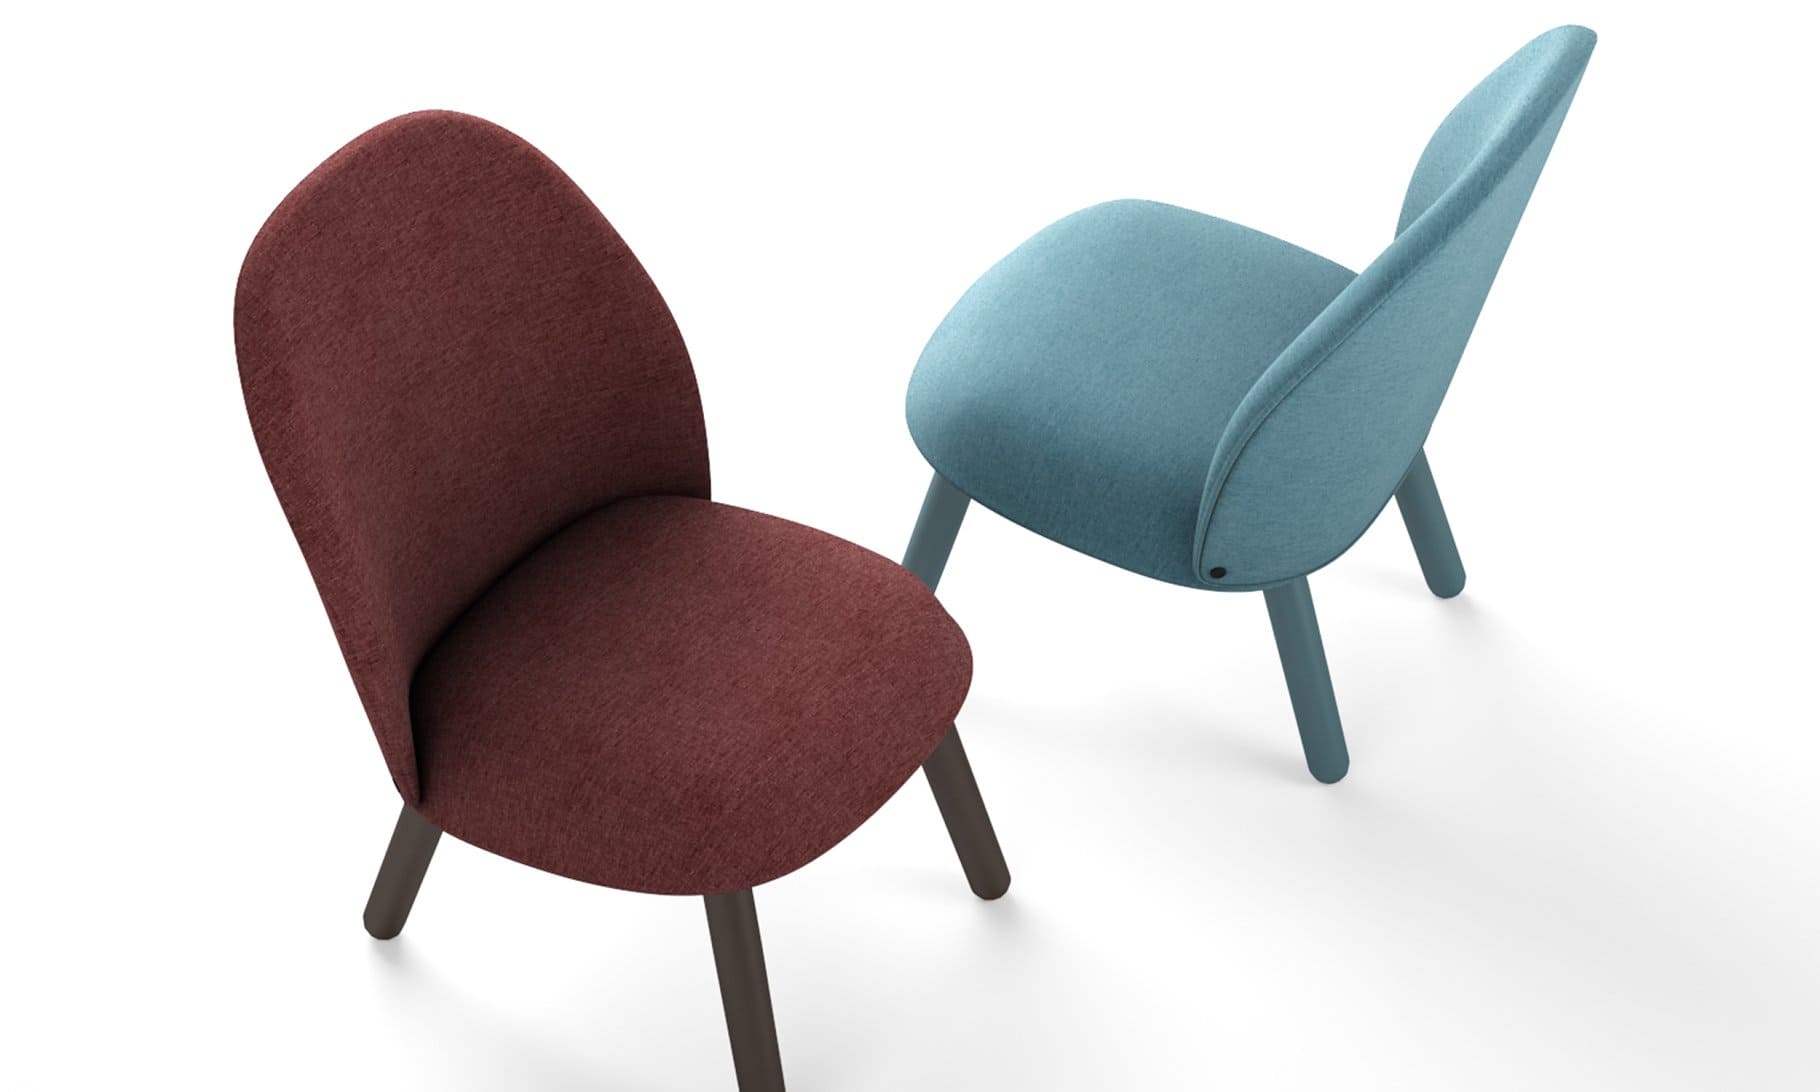 The burgundy and blue ACE Lounge Chair are depicted on a white background.